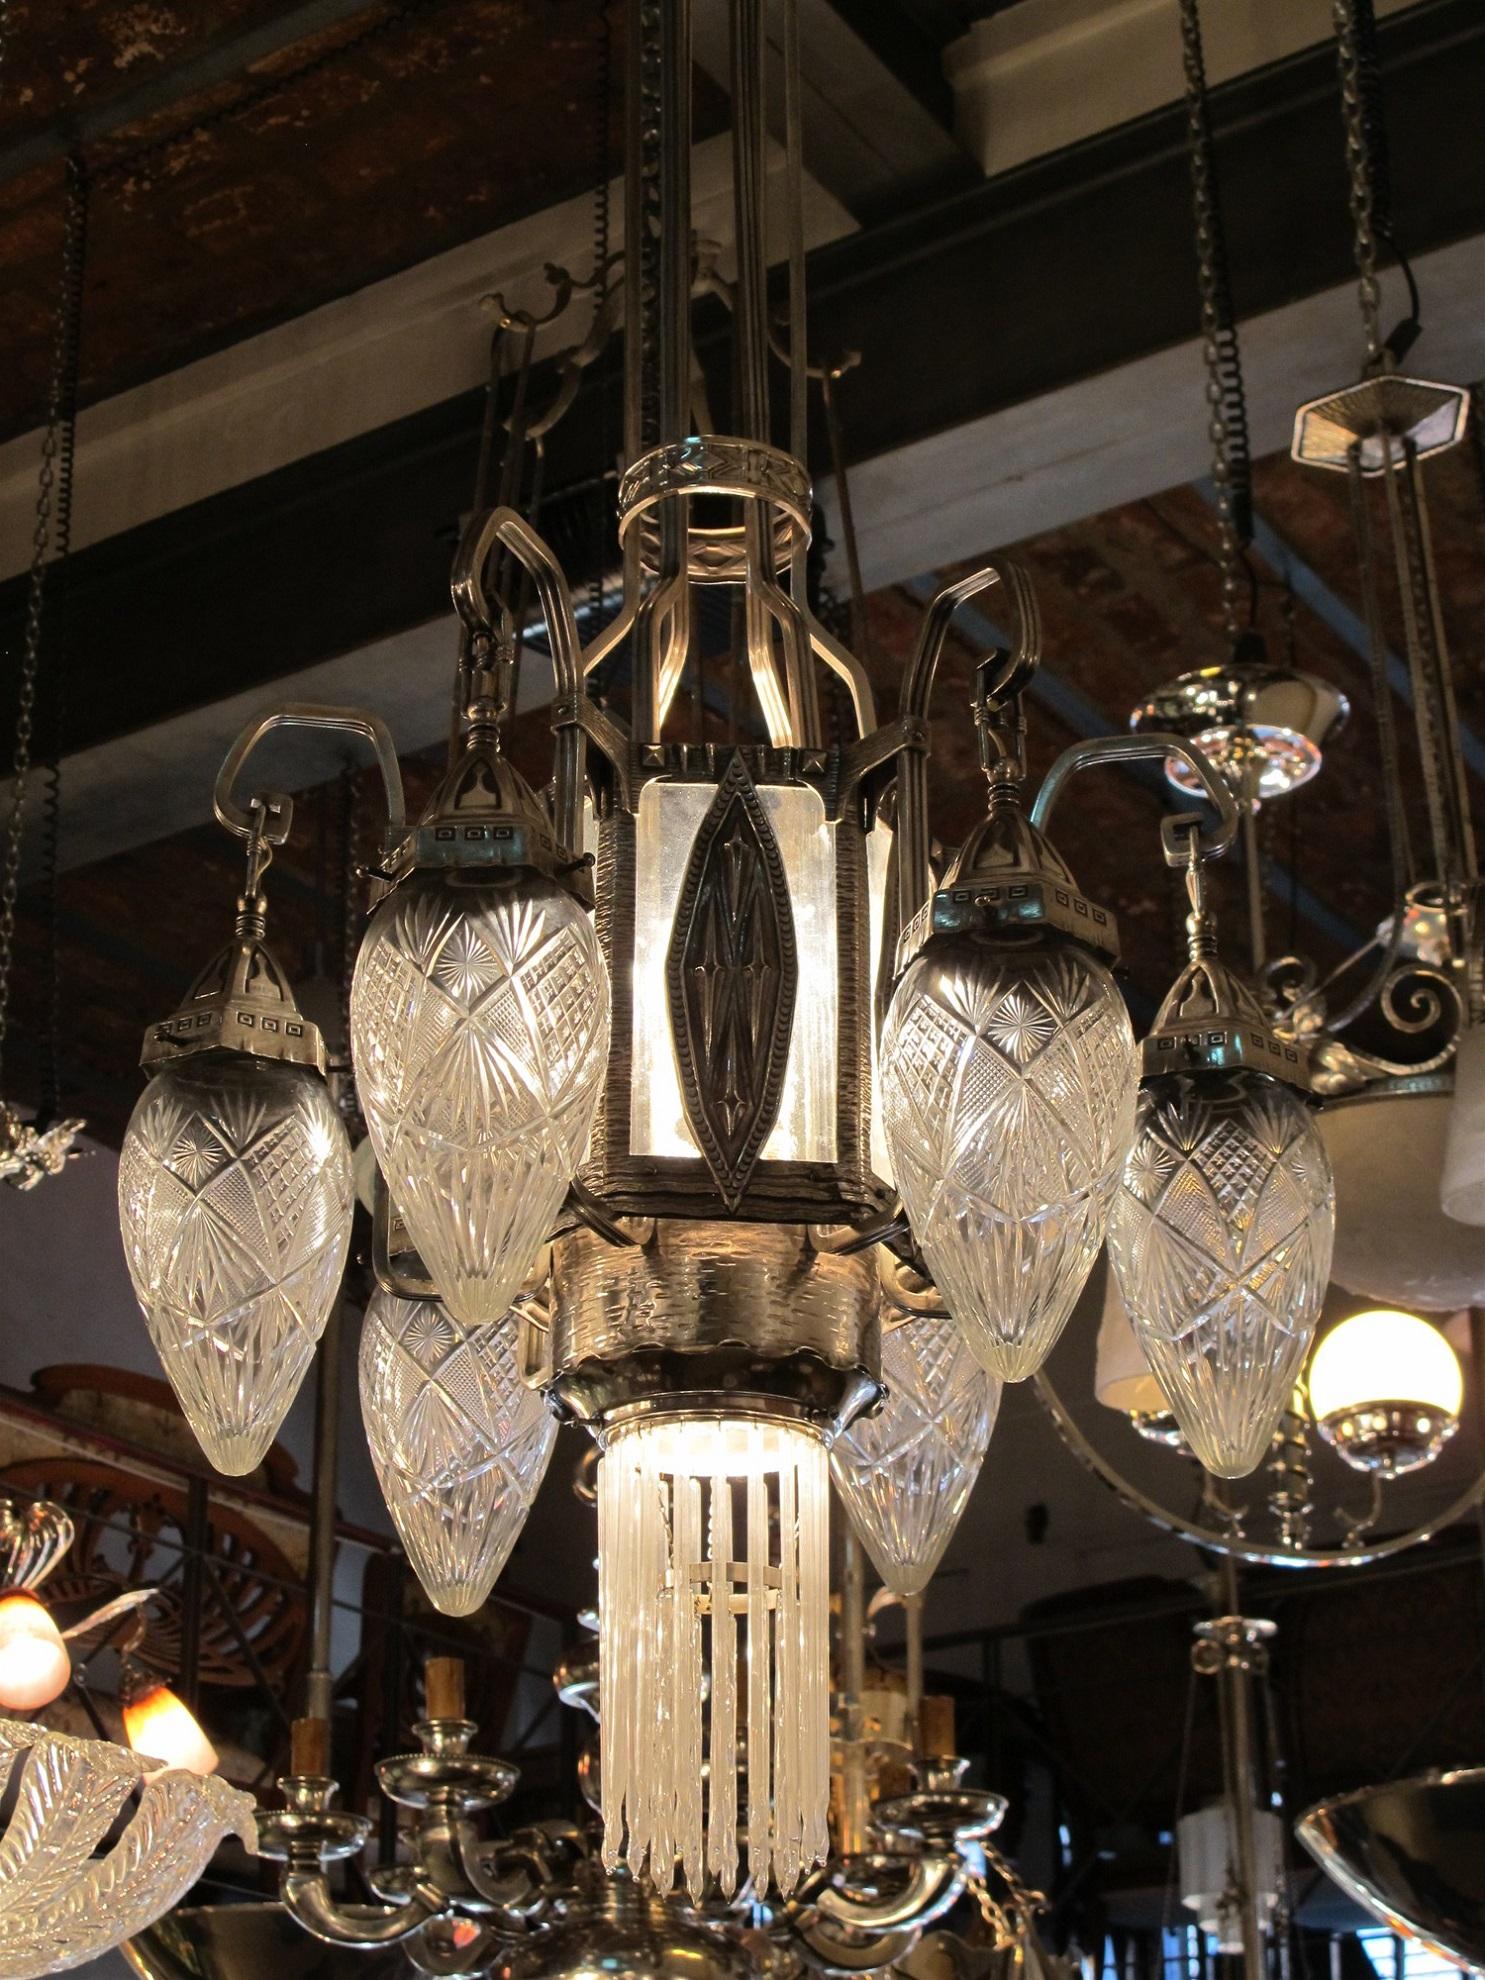 Hanging lamp vienna Secession

Material: silver plated bronze, glass
Style: Vienna Secession
Country: Vienna
If you have any questions we are at your disposal.
To take care of your property and the lives of our customers, the new wiring has been